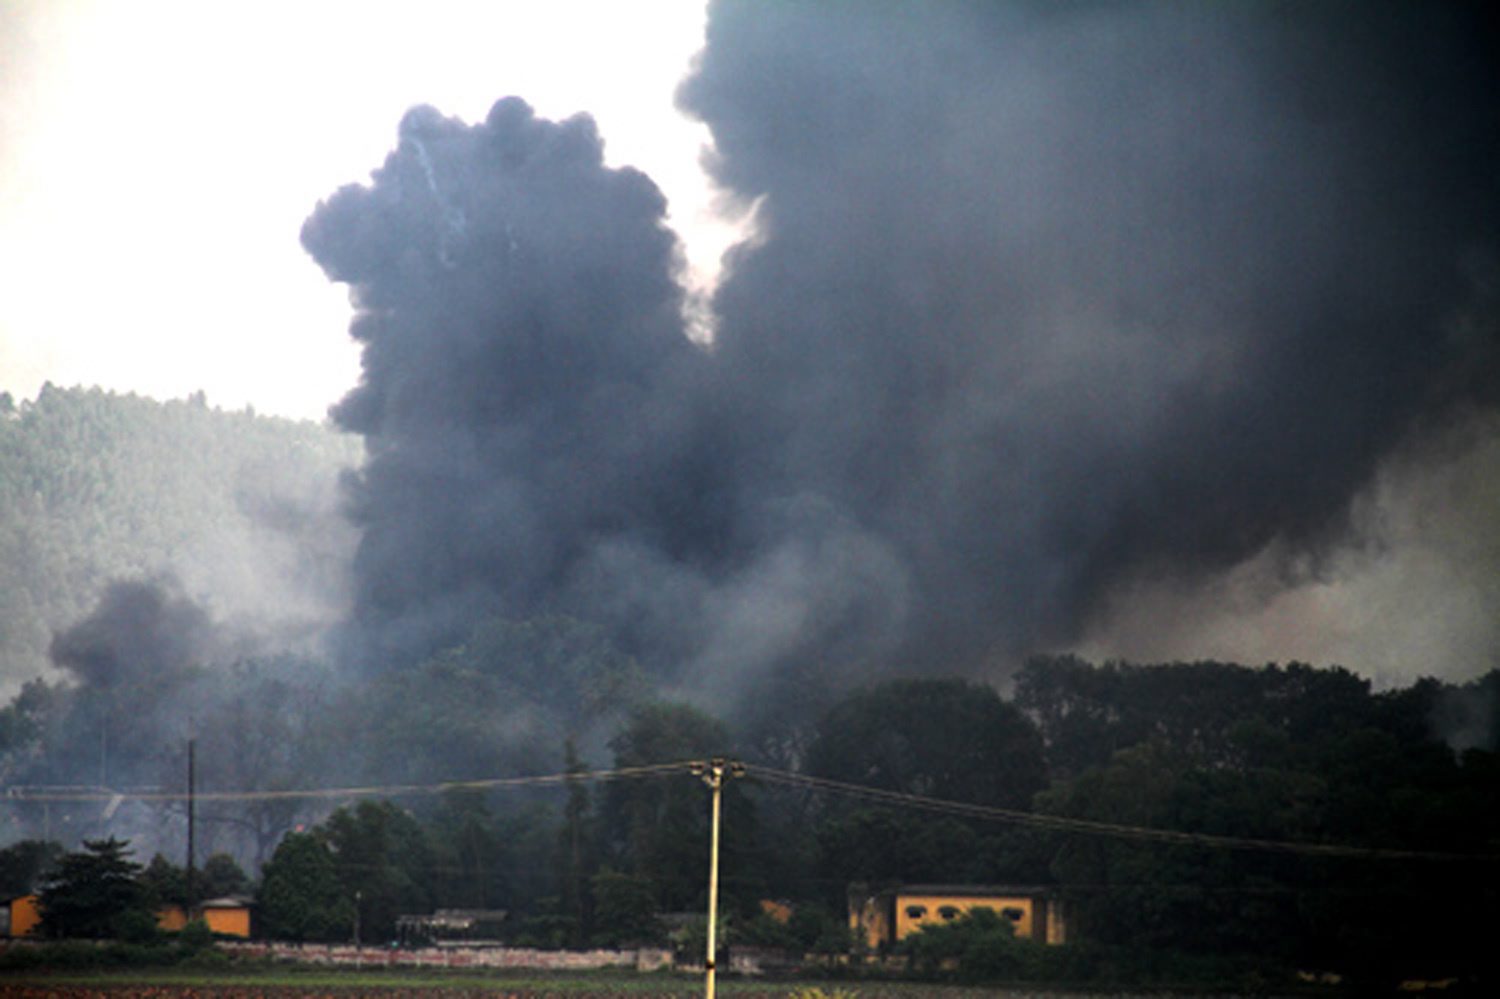 Smoke from explosion at firework factory in Phu Tho province, Vietnam. Photo: EPA